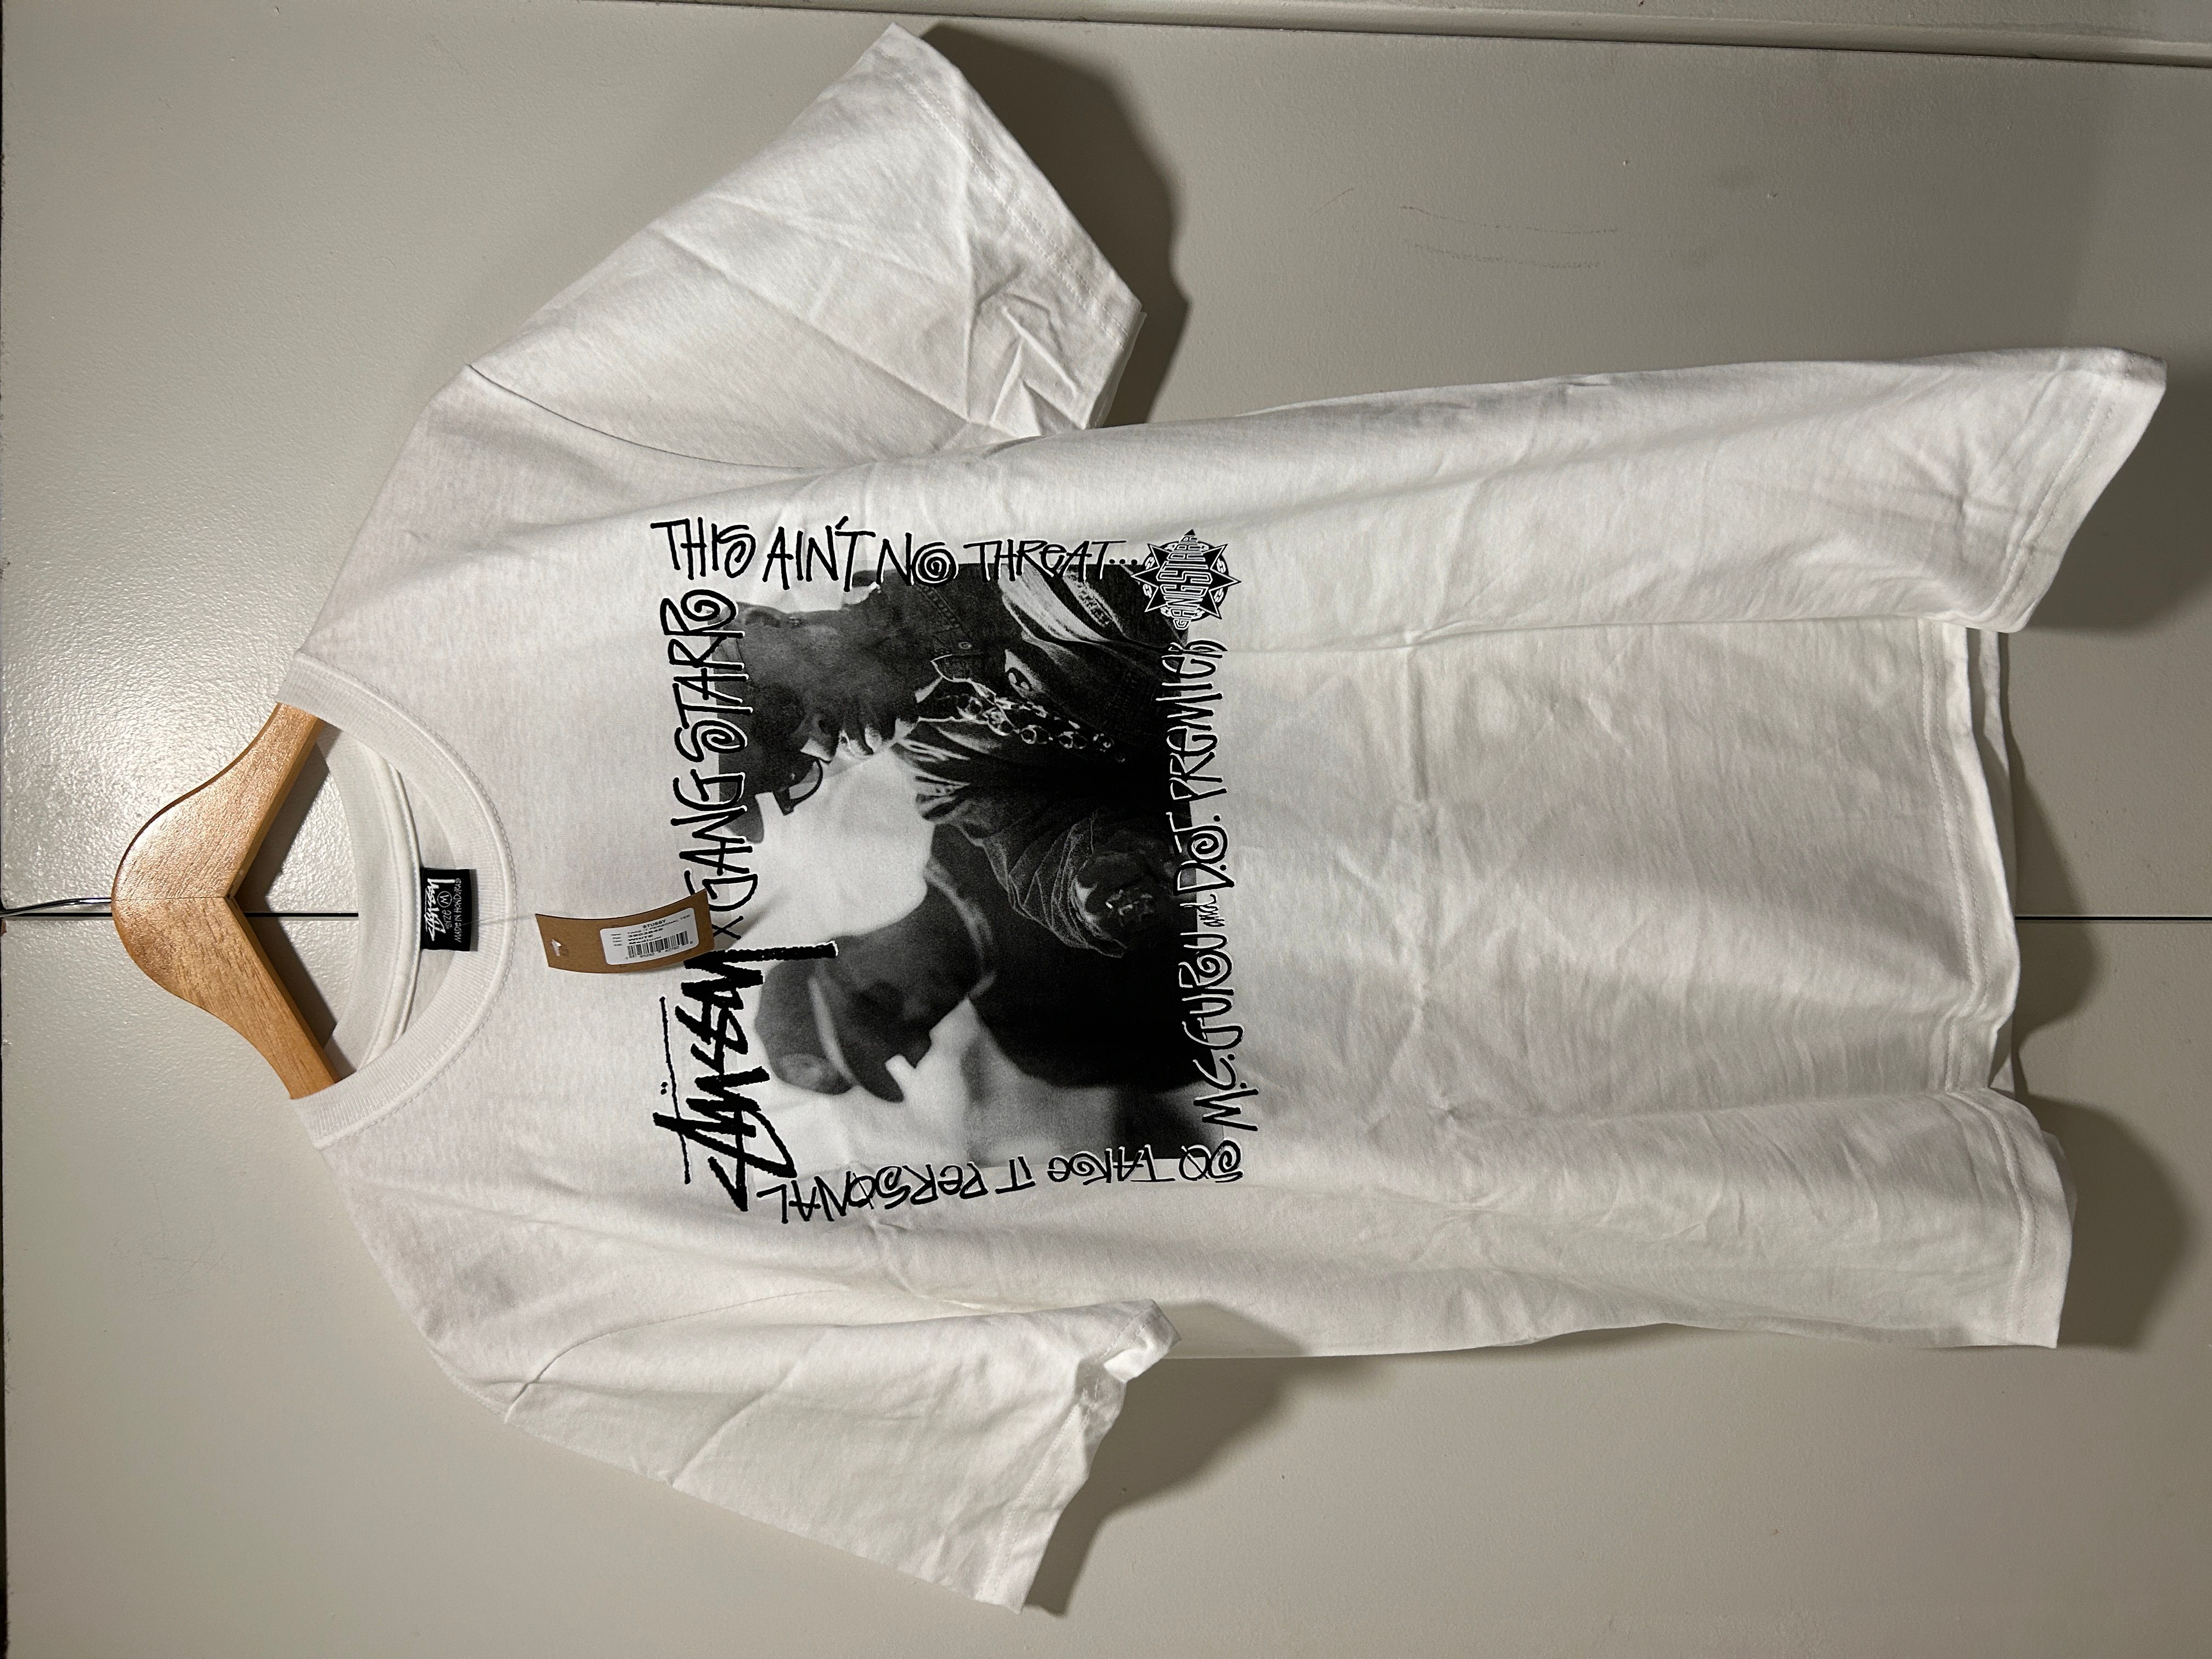 Stussy Stussy Gang Starr Take It Personal Tee - white | Grailed